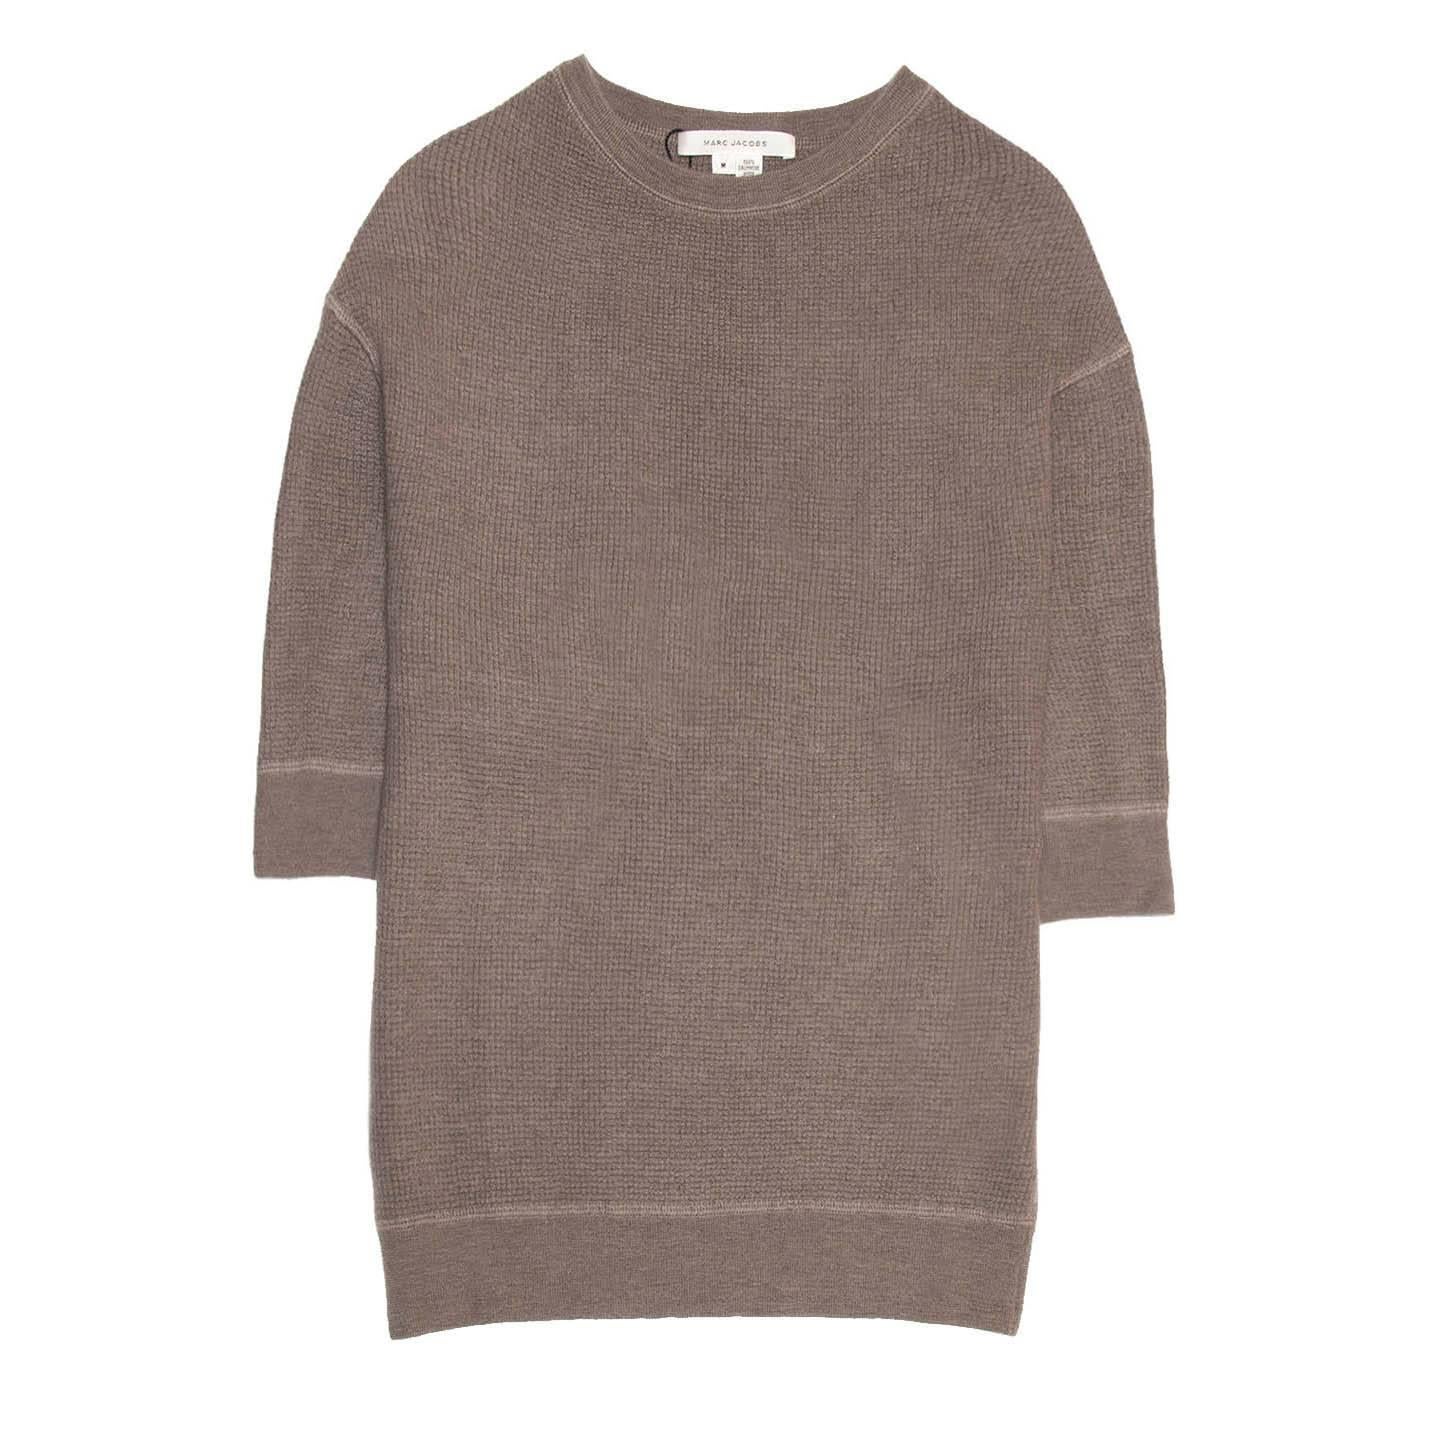 Grey brown cashmere waffle knit crew neck pullover with 3/4 length sleeves. Neck, cuffs and hem are finished with fine ribbed borders enriched by tone-on-tone flatlock stitching detail to match the armholes seam.

Size  M Universal sizing

Condition